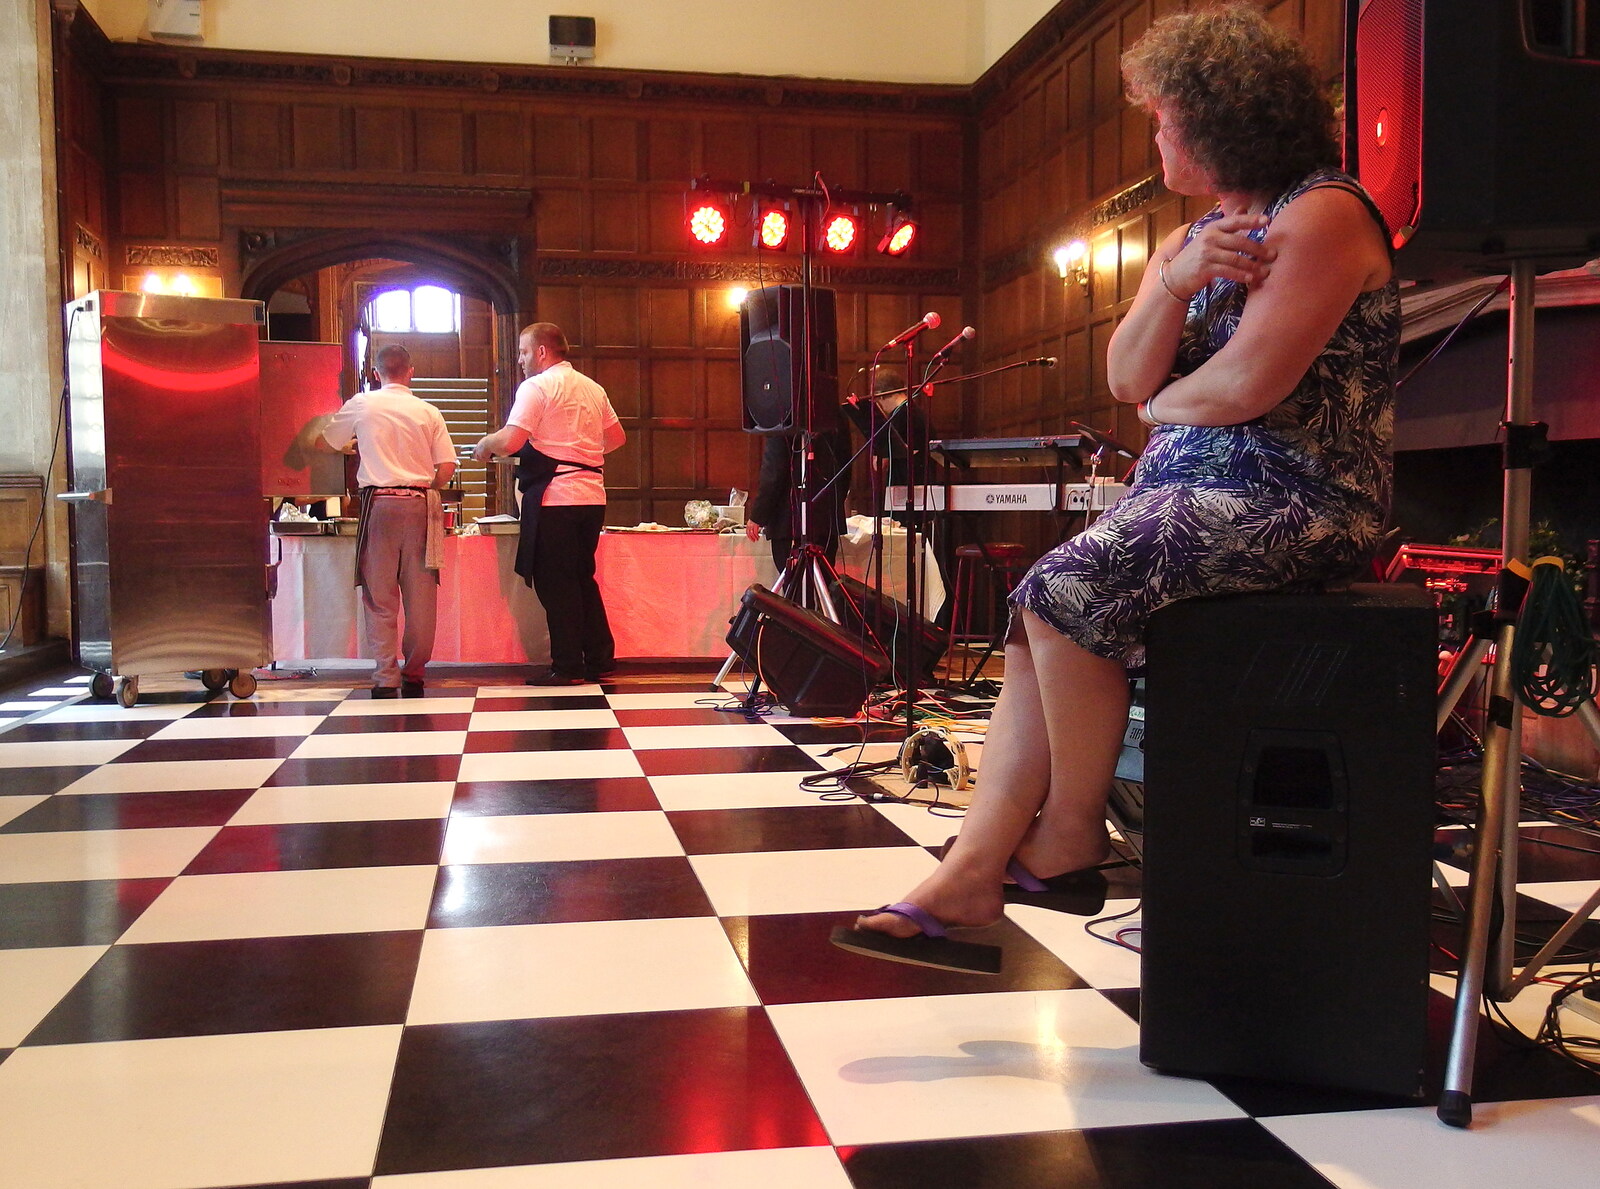 Jo sits on the subwoofer from The BBs at Hengrave Hall, Hengrave, Suffolk - 18th August 2013